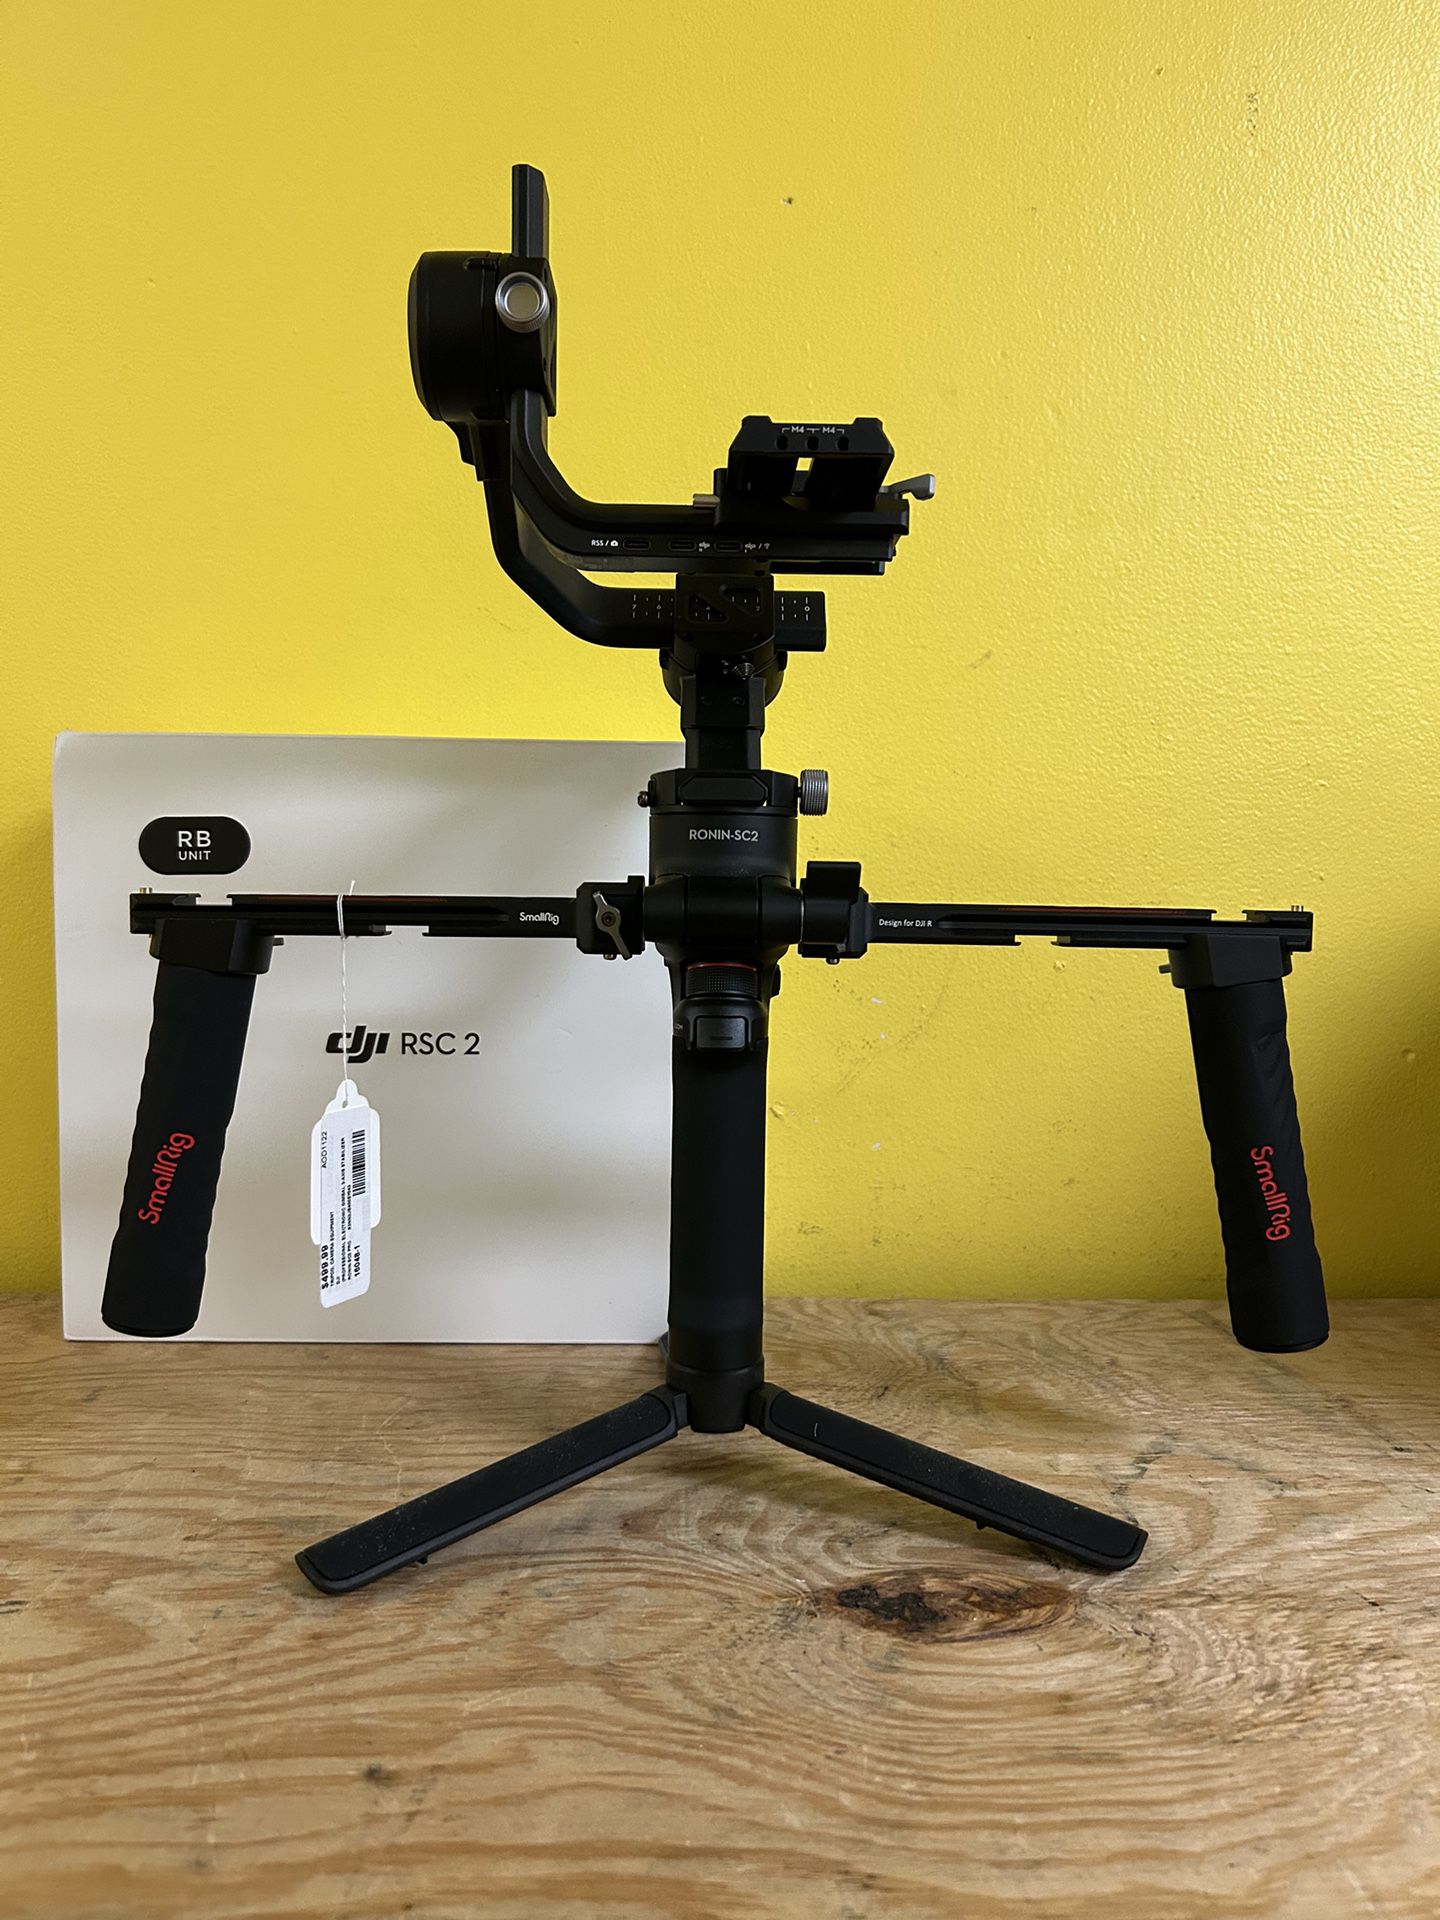 DJI Pro RSC2 Gimbal 3-axis Camera Stabilizer With Extra Hand Grips 